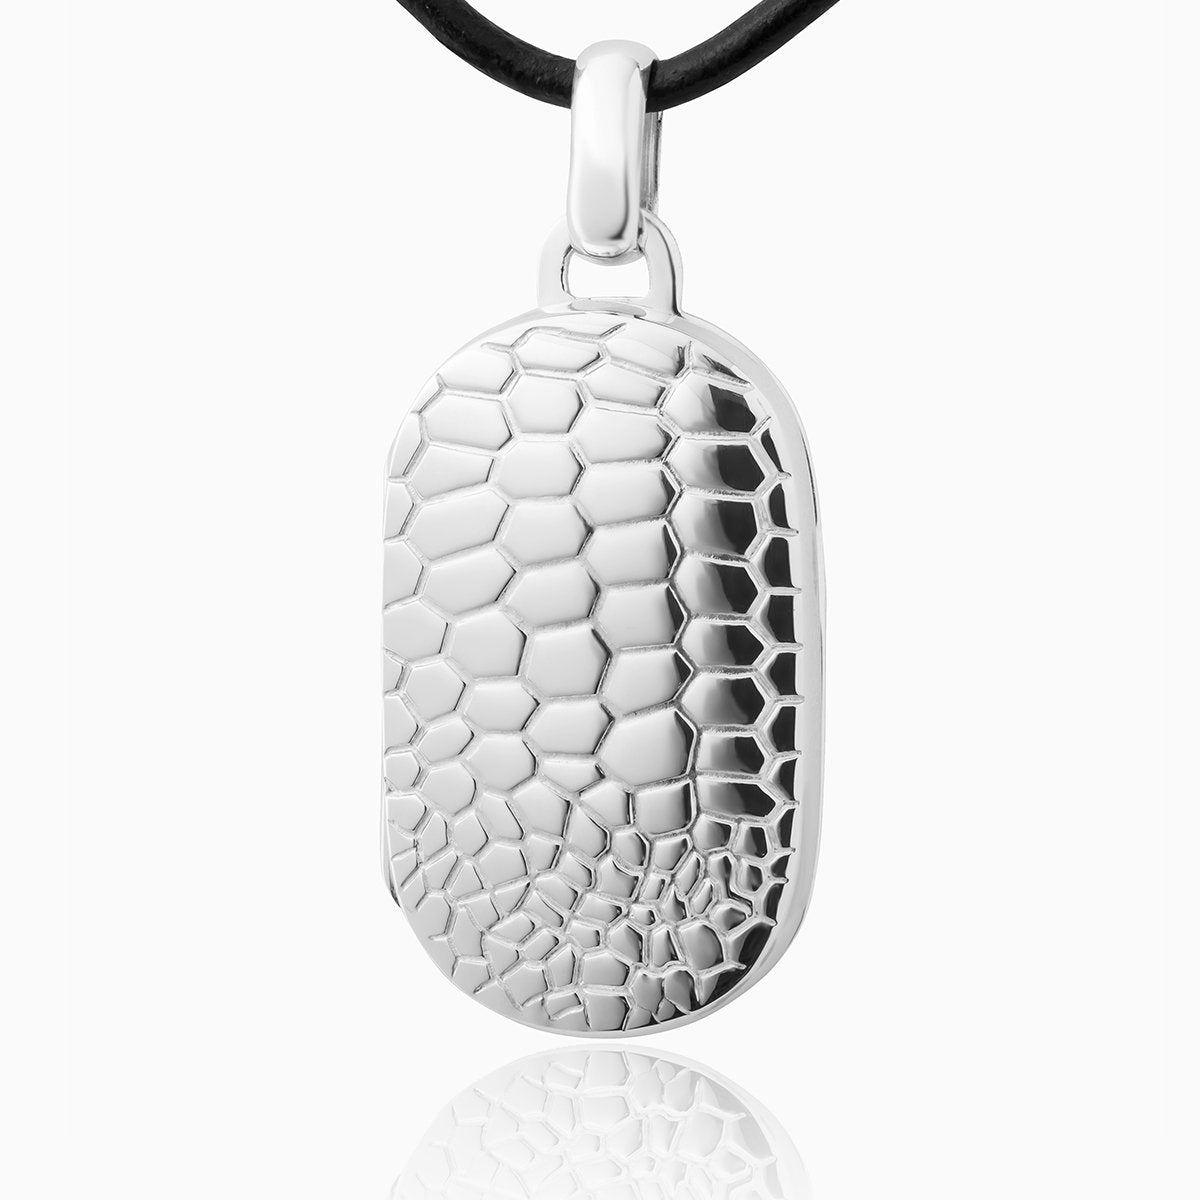 Sterling silver dog tag shaped locket embossed with a crocodile design on a black leather neck cord